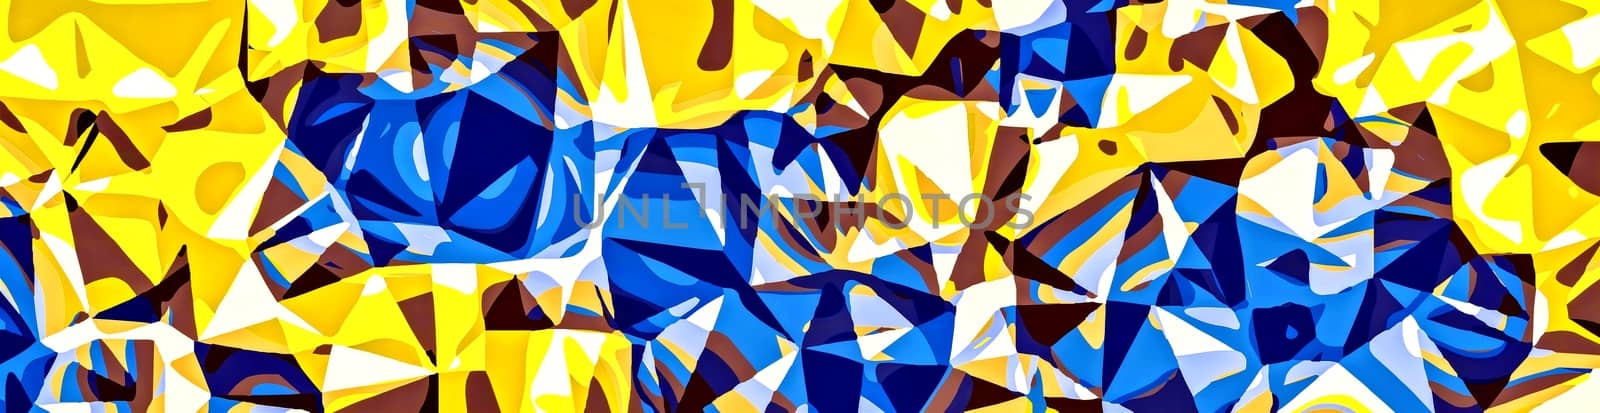 blue and yellow painting abstract background in panorama by Timmi